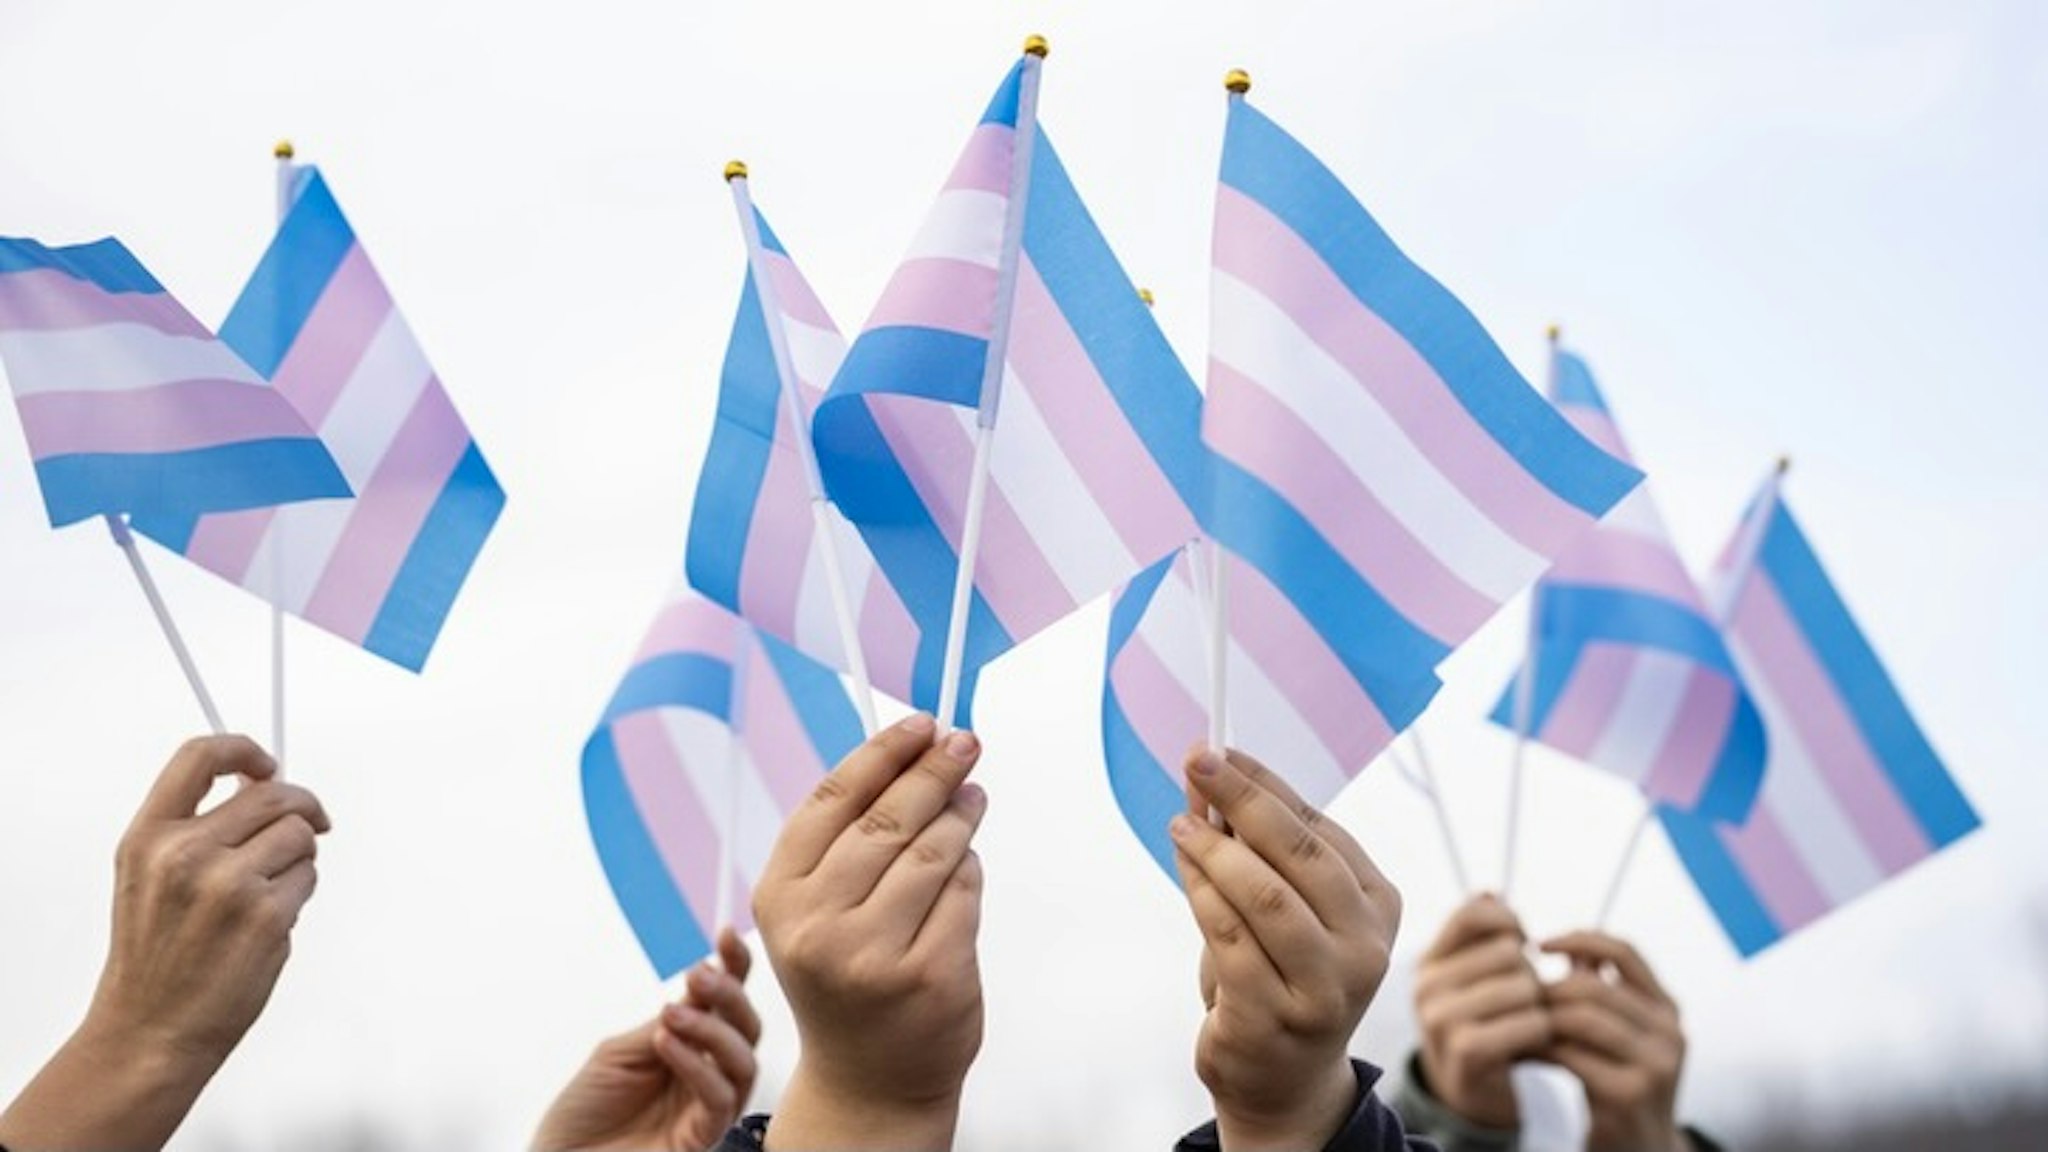 Transgender flags holding by people on a demontration - stock photo Transgender flags holding by people on a demontration Vladimir Vladimirov via Getty Images